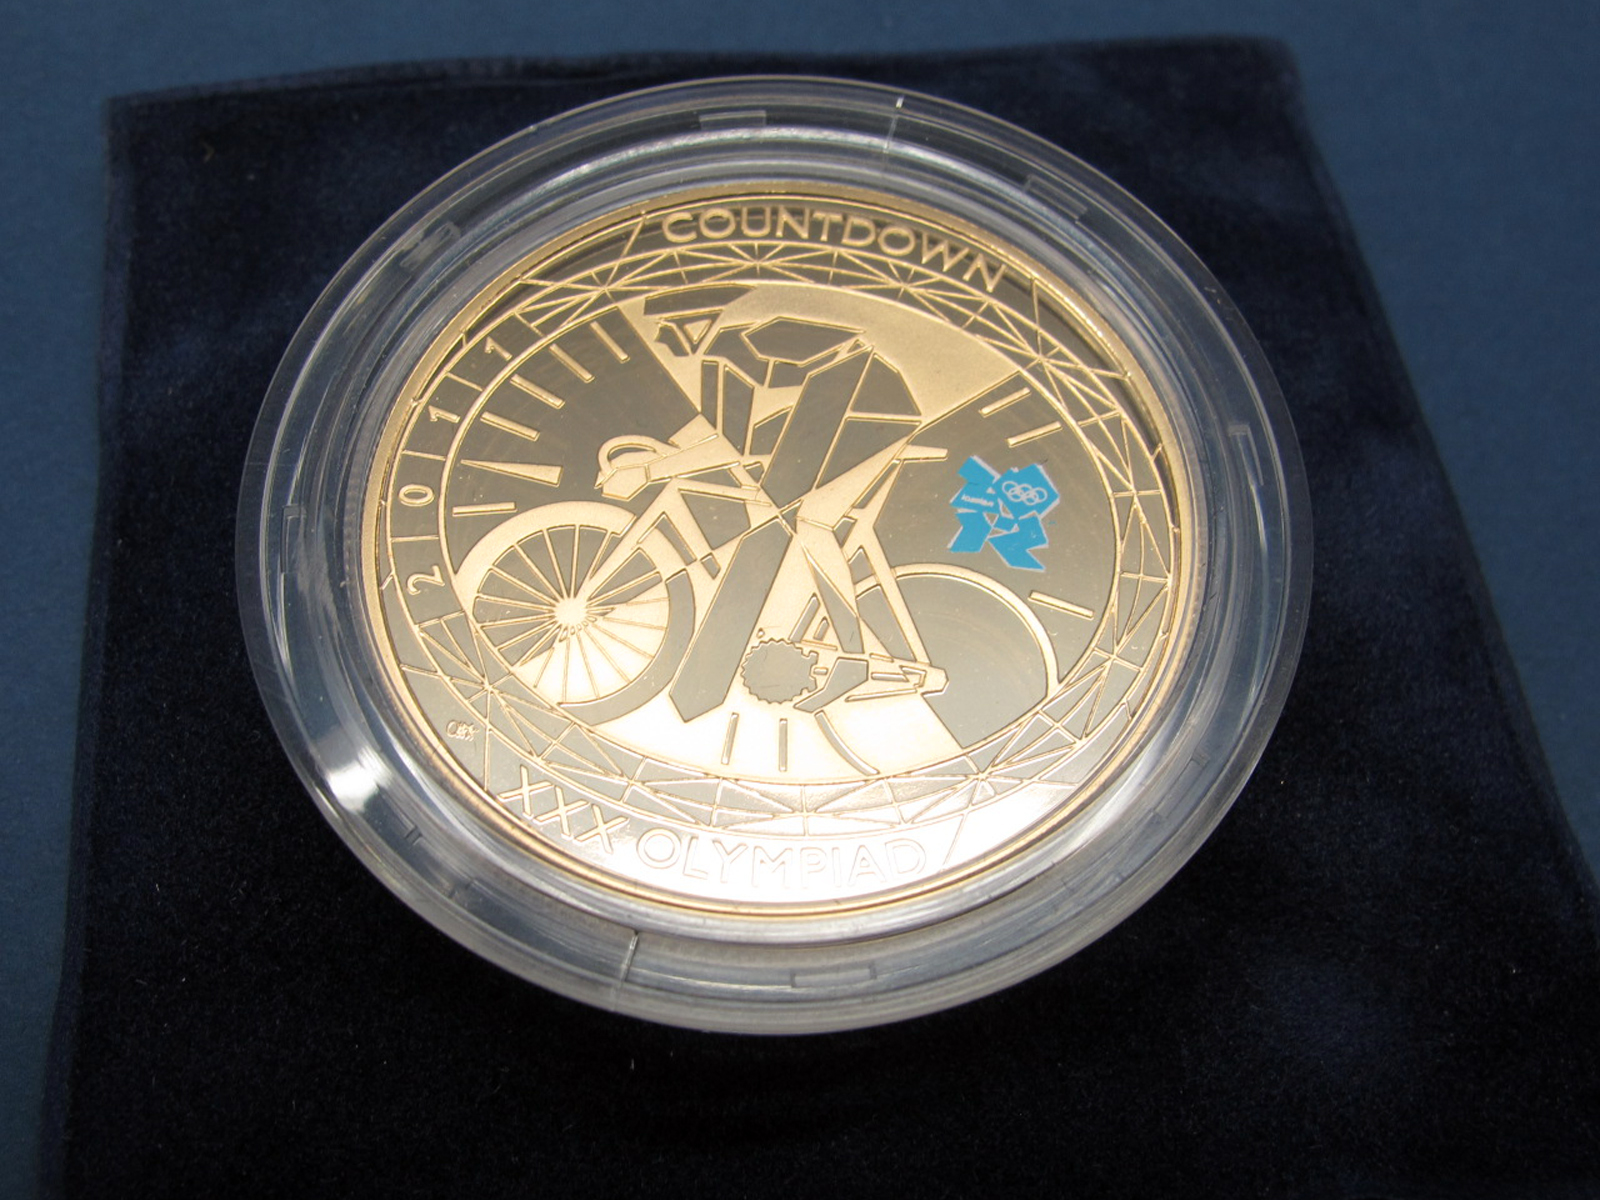 United Kingdom Gold Proof Five Pounds Countdown 2011 XXX Olympiad, presented within a capsule, no